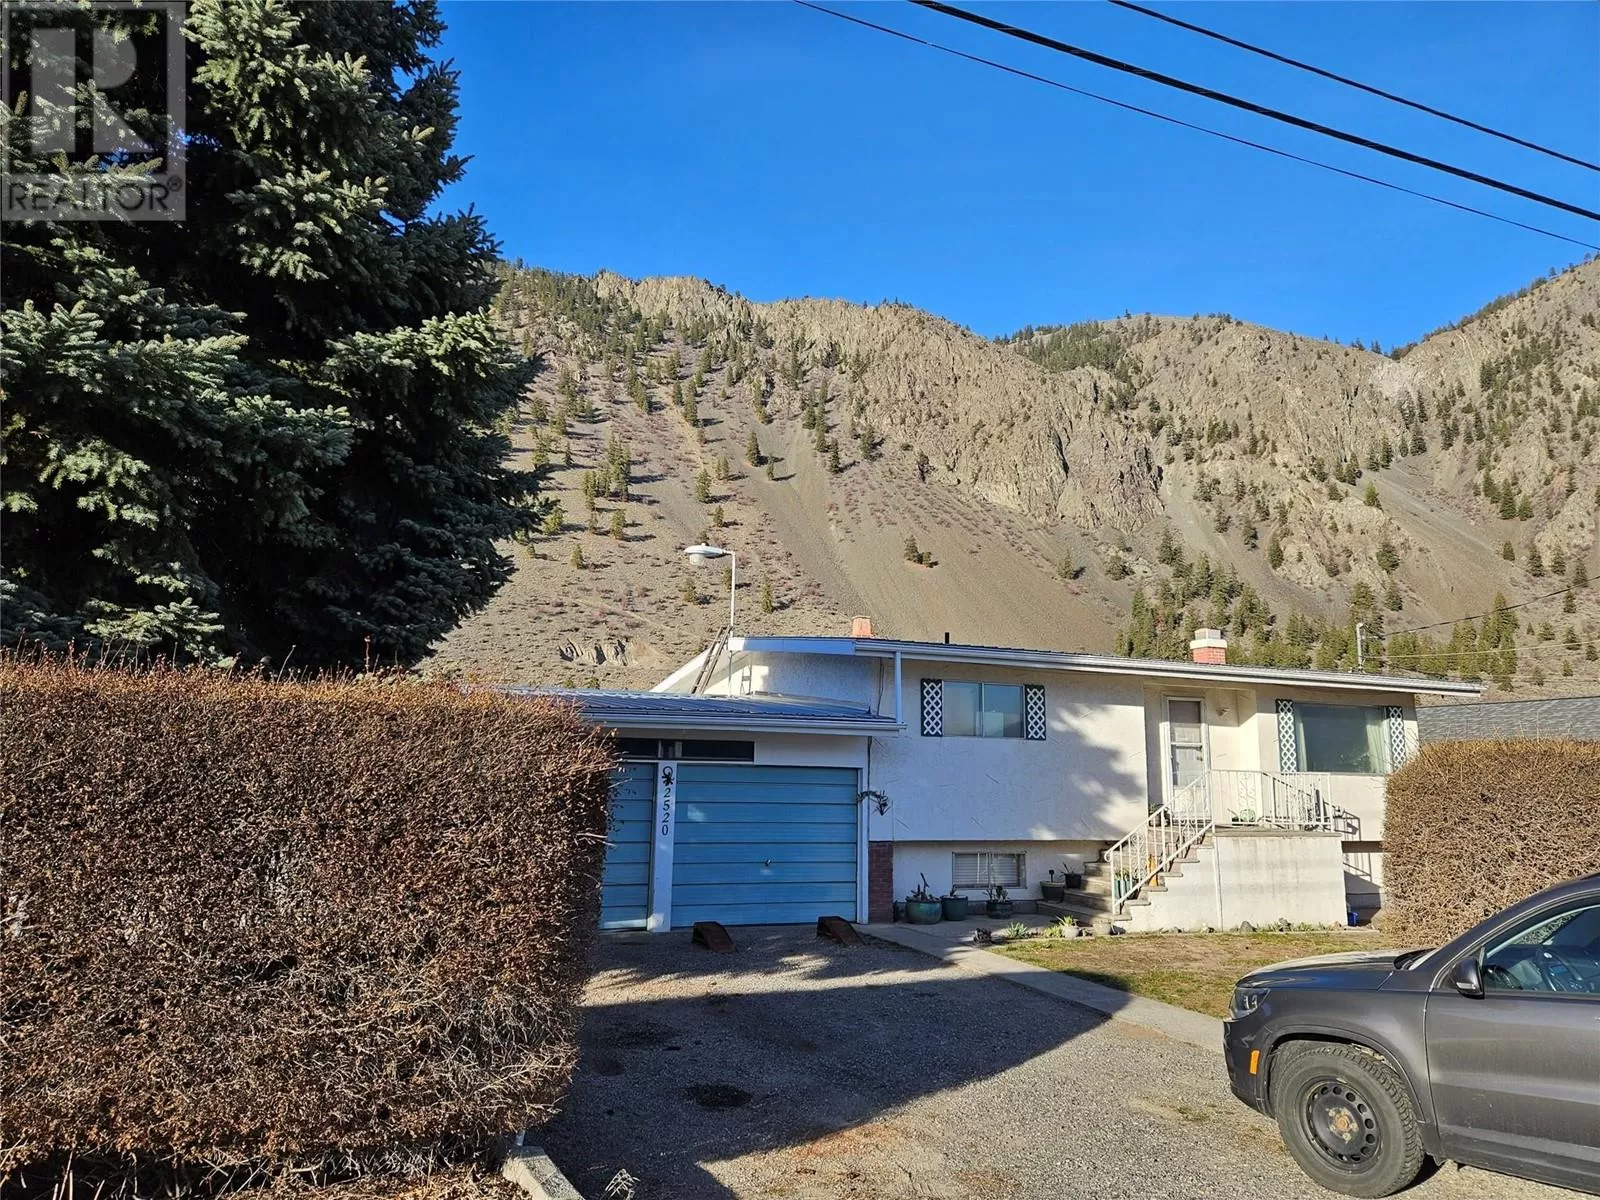 House for rent: 2520 Upper Bench Road, Keremeos, British Columbia V0X 1N4